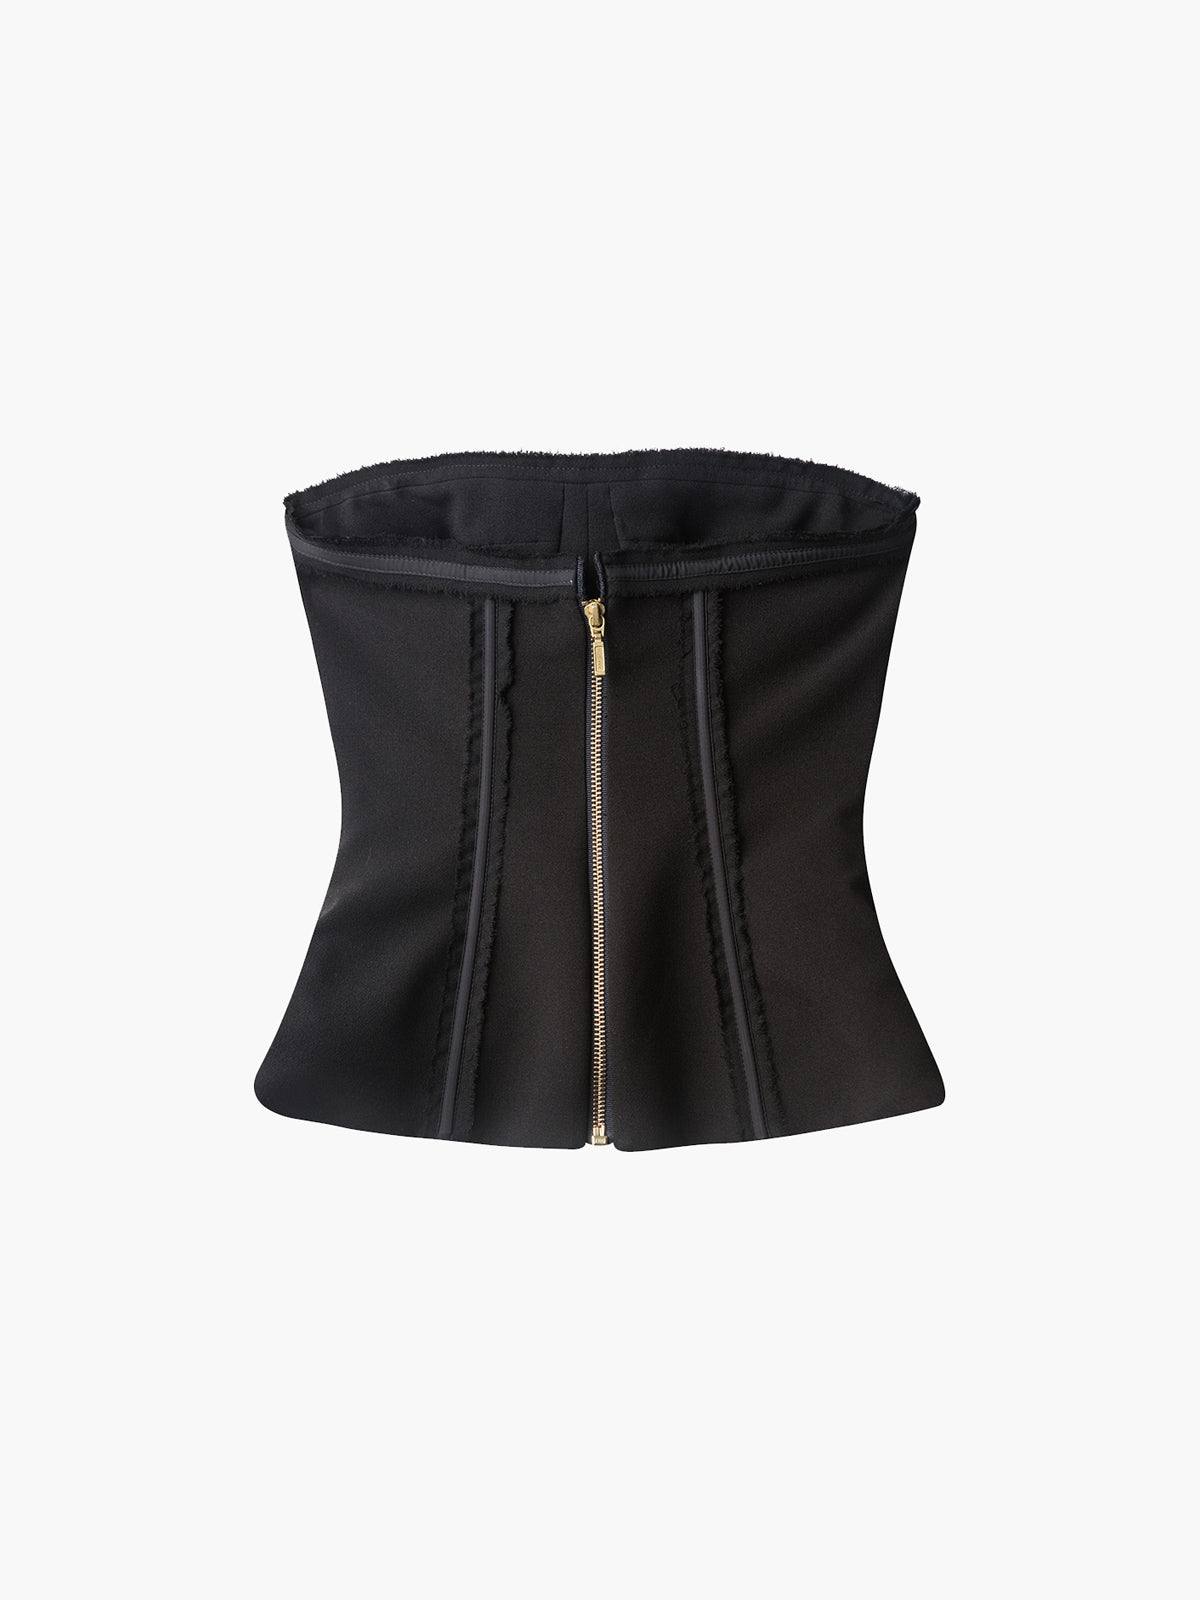 Marge Corset Top Marge Corset Top - Fashionkind